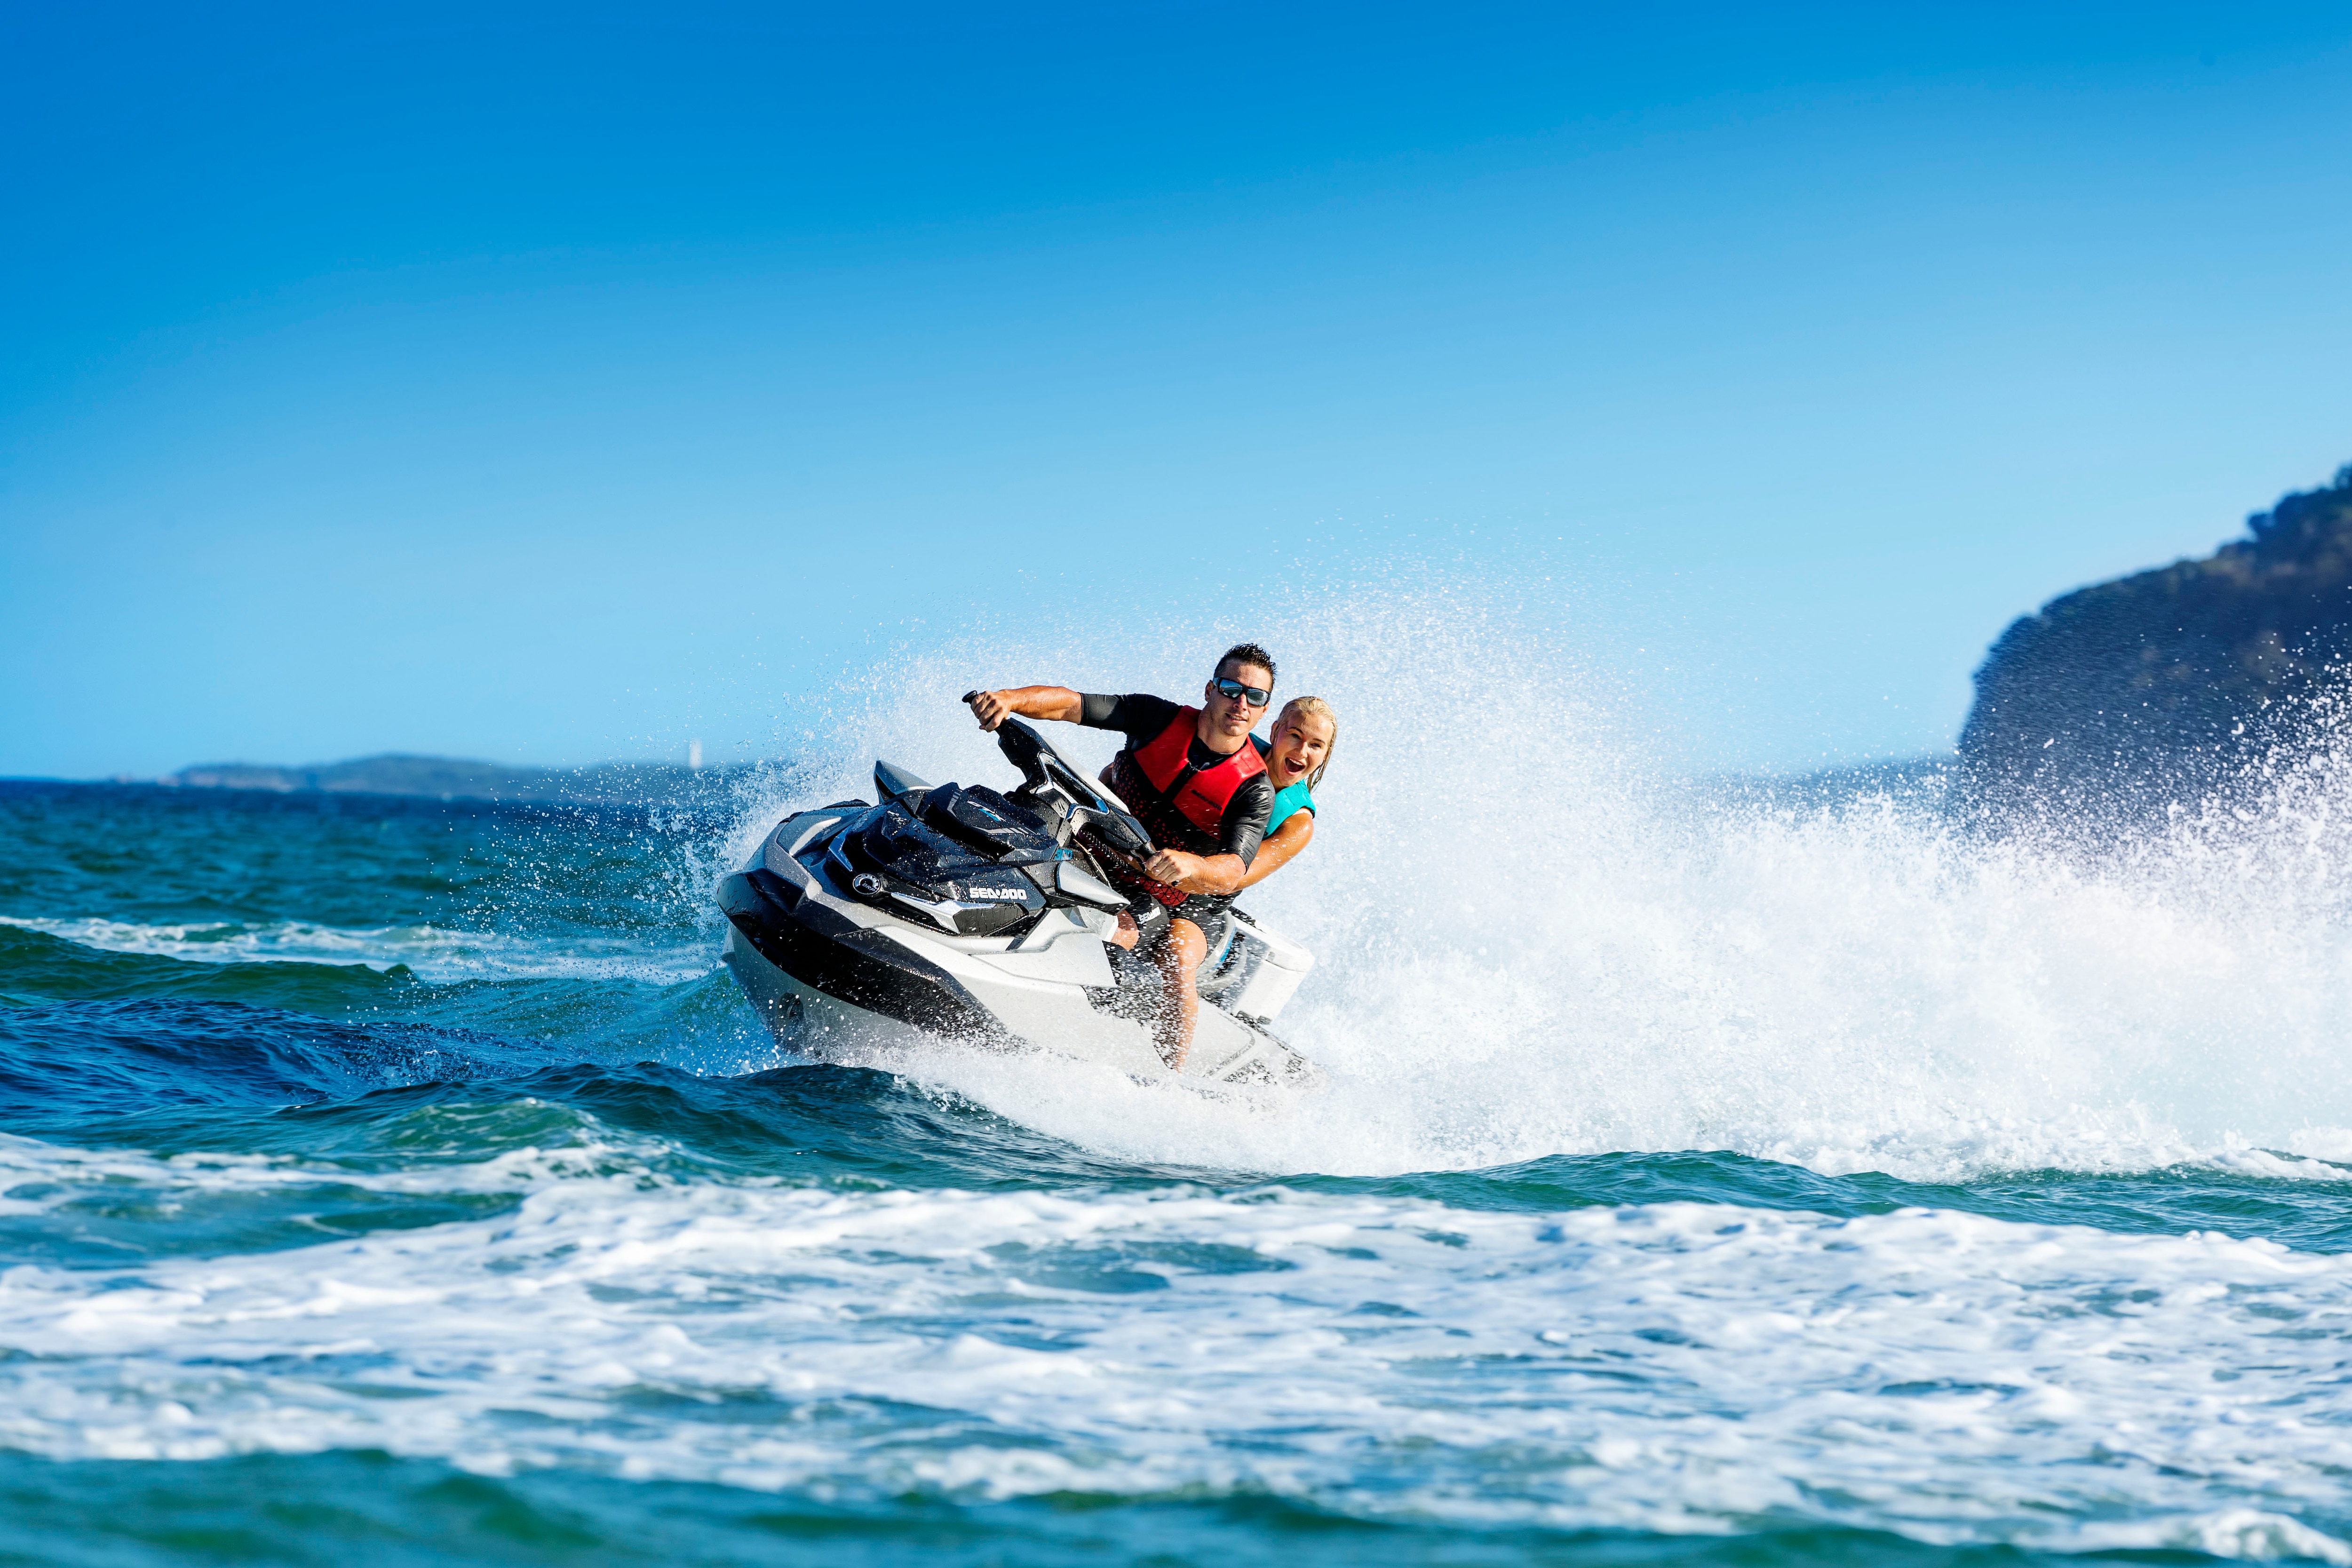 Man driving a GTI SE Sea-Doo with his girlfriend